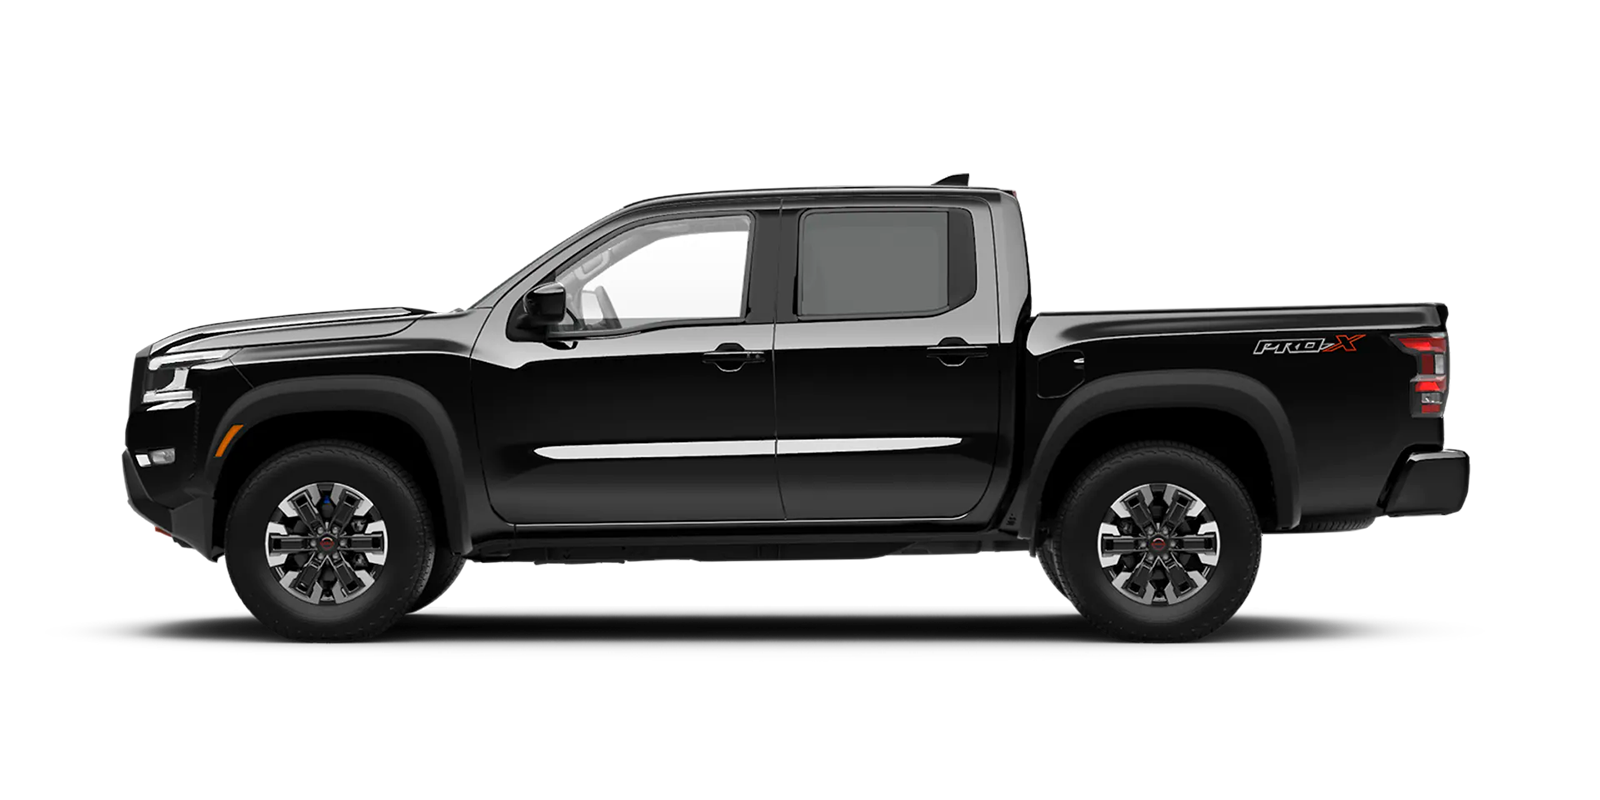 2022 Frontier Crew Cab Pro-X 4x2 in Super Black | Fort Collins Nissan in Fort Collins CO